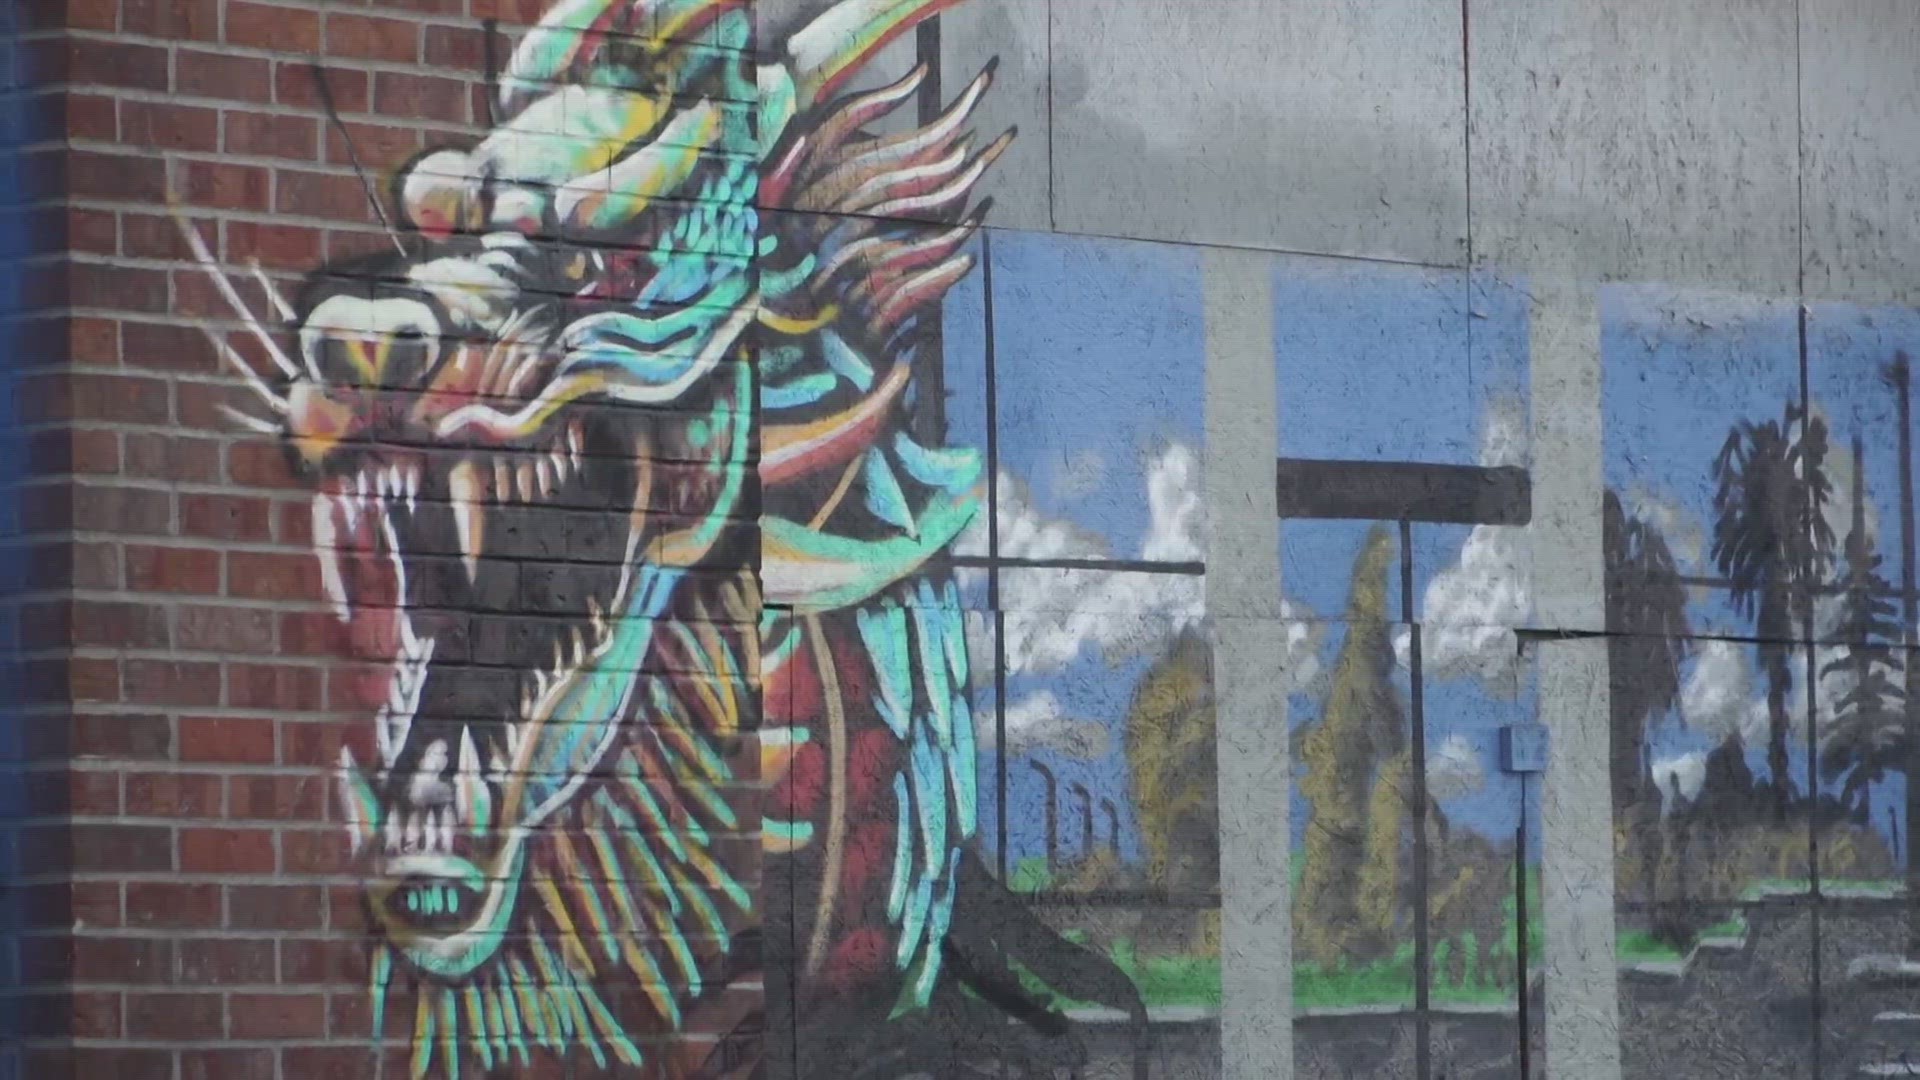 Controversy over the Lunar New Year mural in Little Saigon